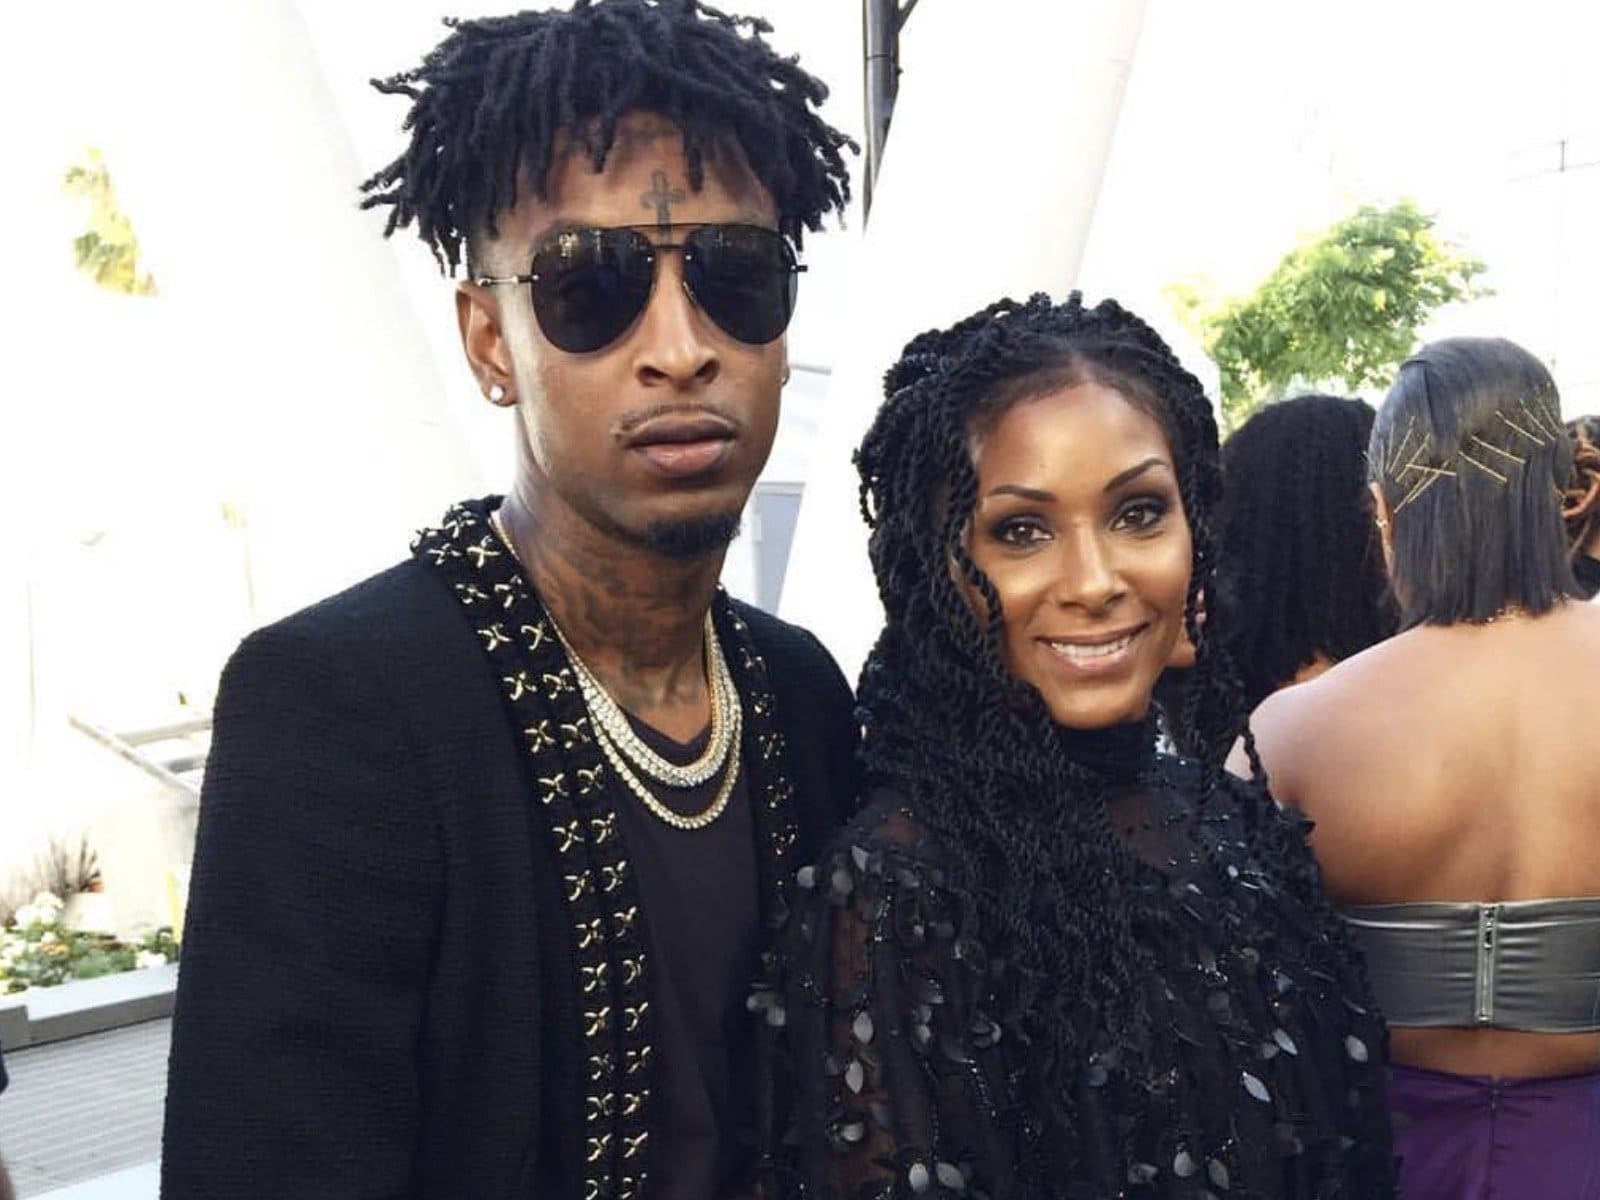 21 Savage's Mom Is Grateful To Jay-Z, Cardi B And More After He Got Released From Jail - Read Her Message